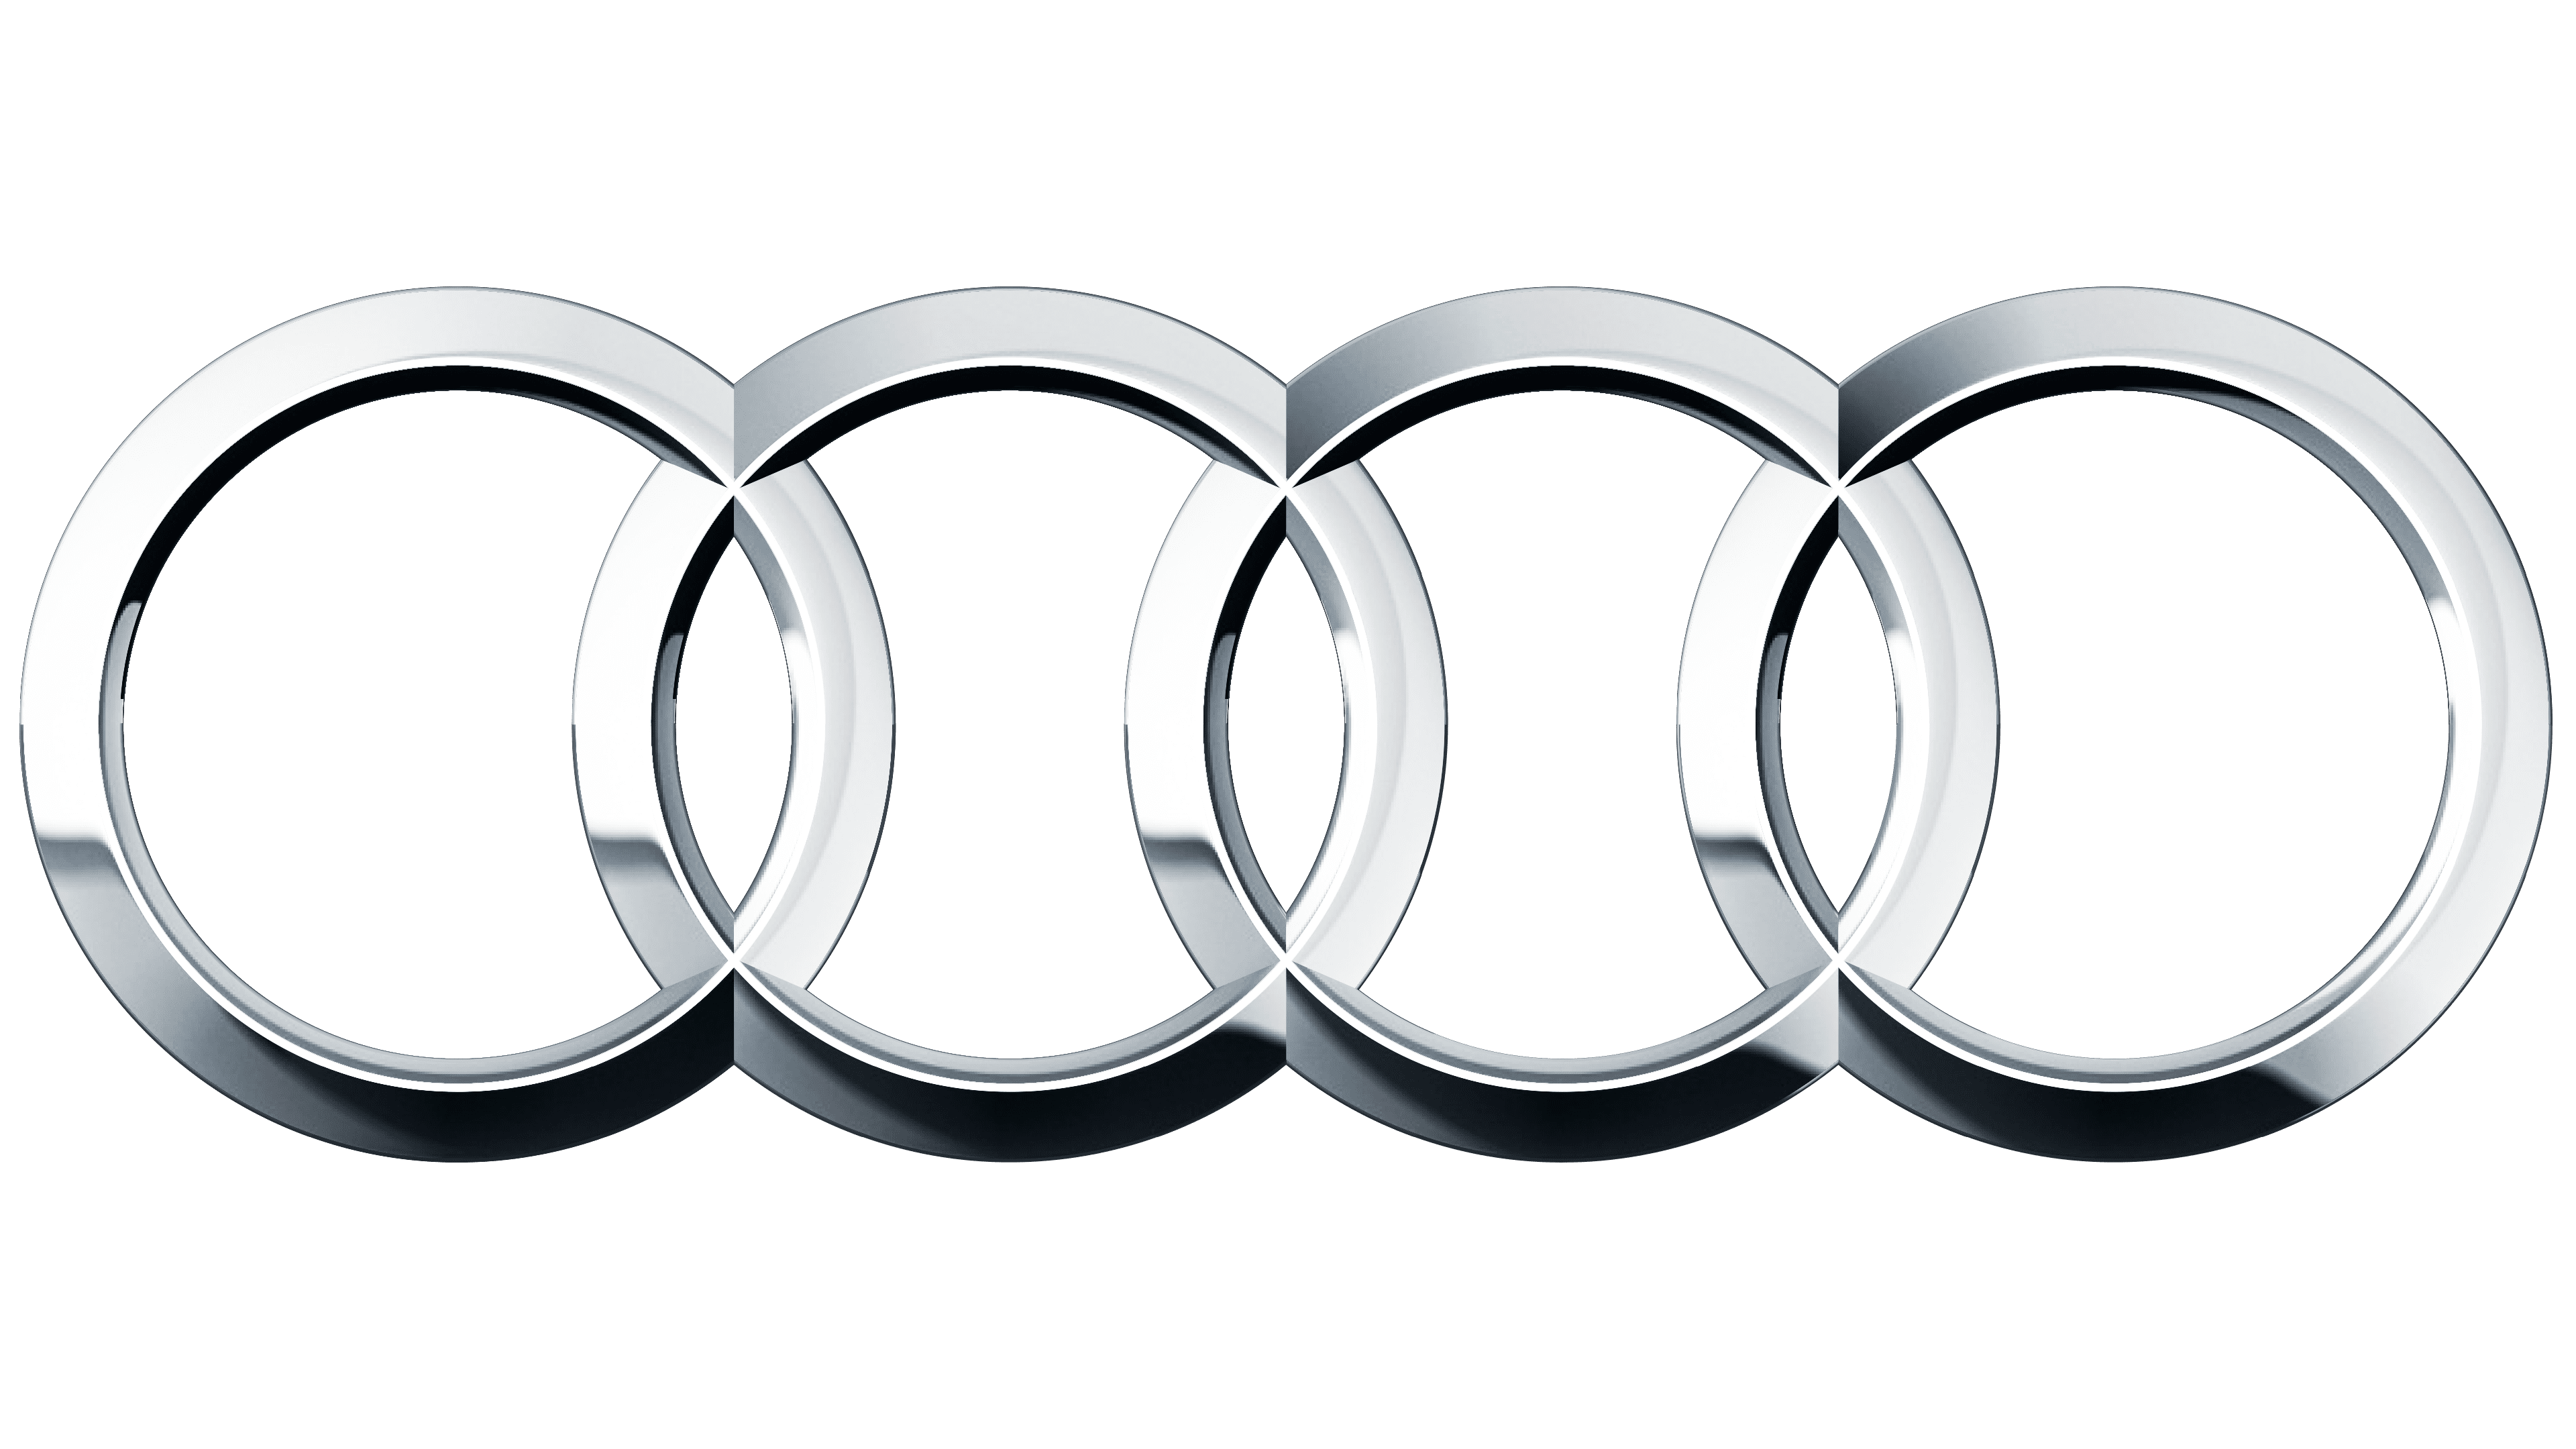 Audi Logo, symbol, meaning, history, PNG, brand